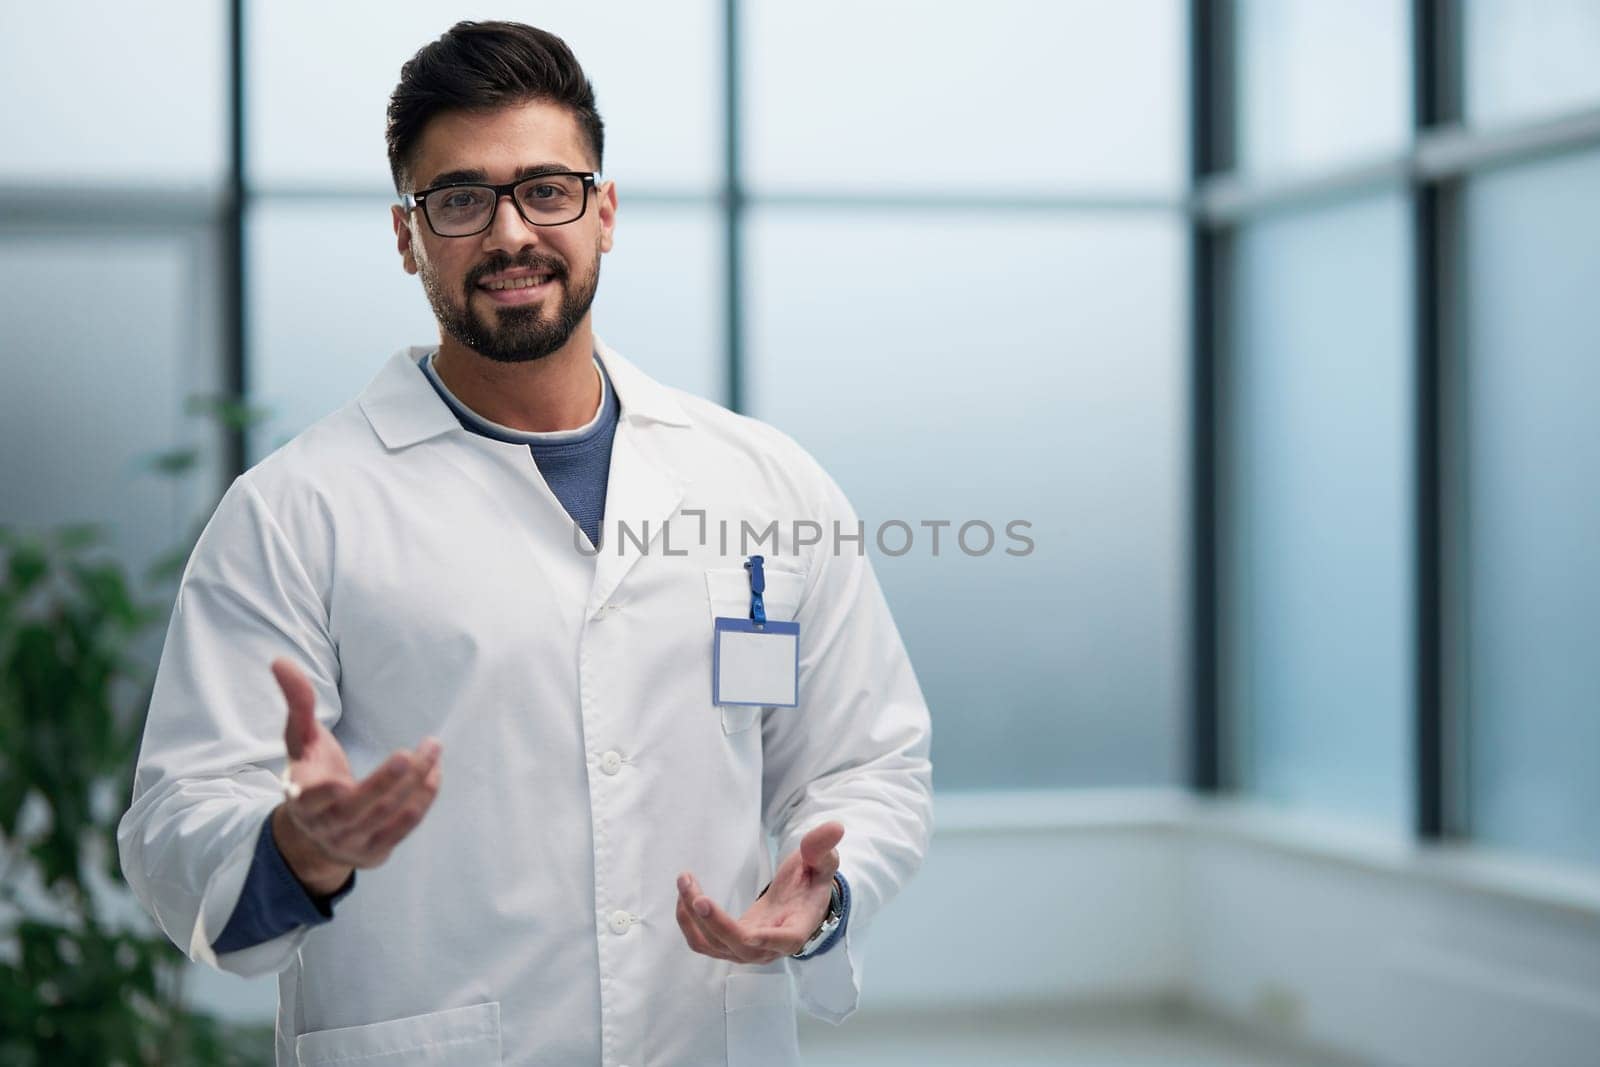 Doctor middle man, medical worker, makes a hand gesture inviting patients.